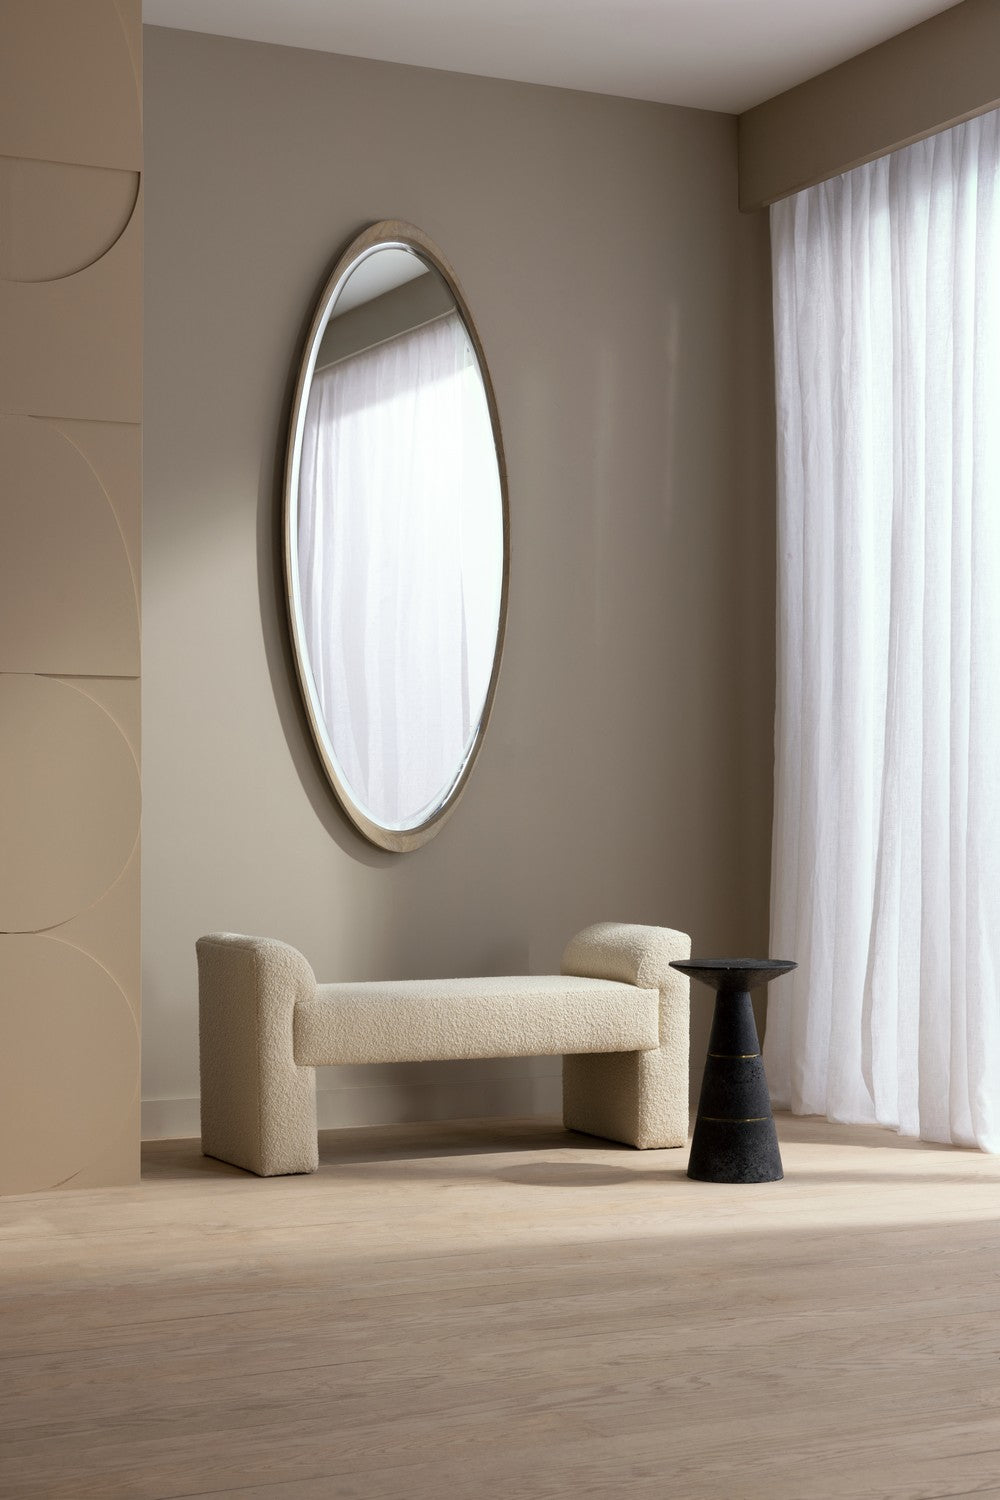 Mirror from the Wilmington collection in Limewash finish